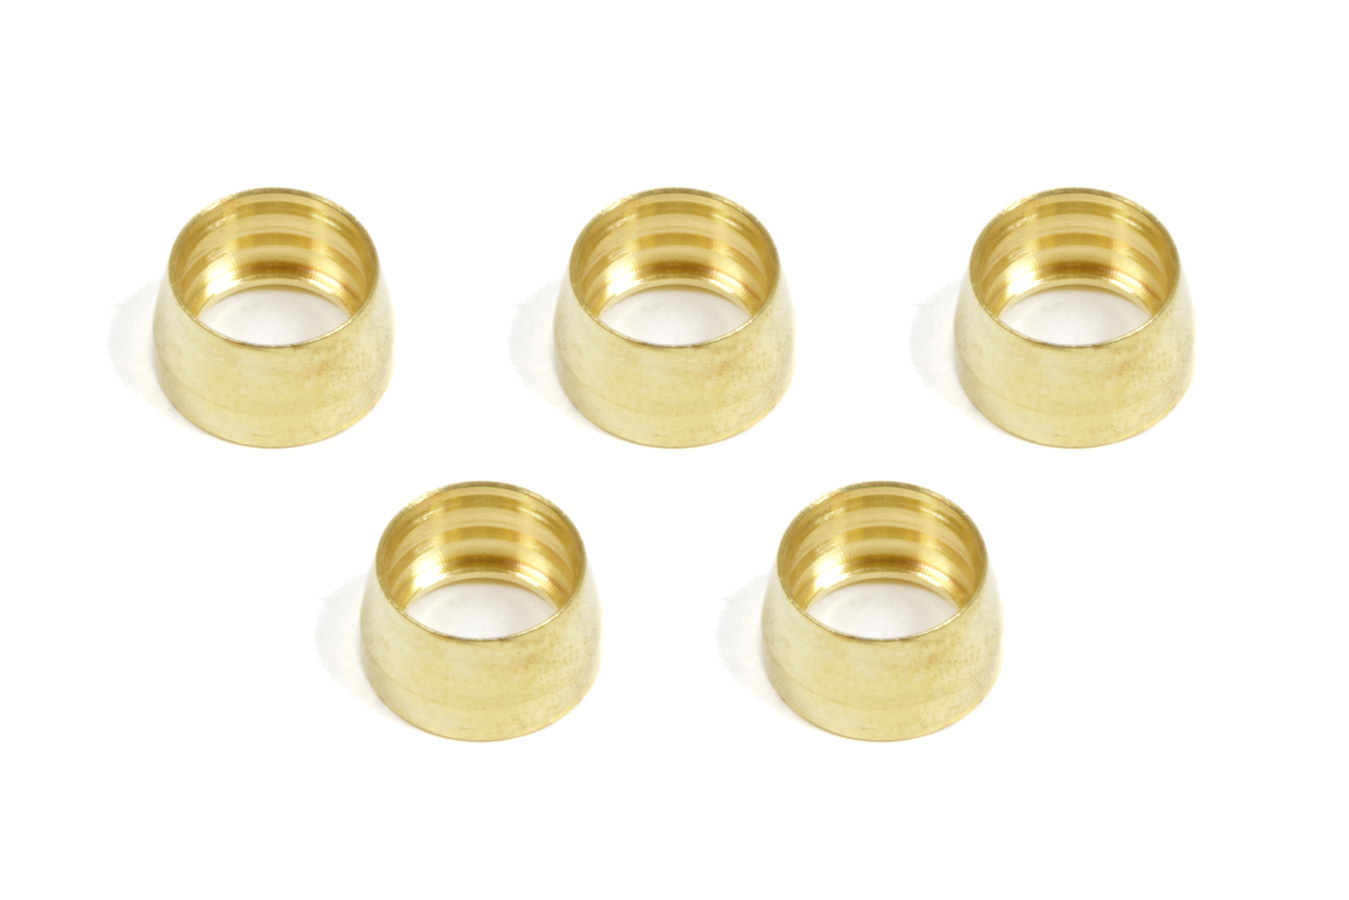 Aeroquip FCM3824 Compression Ferrule, 8 AN, Brass, PTFE Fittings, Set of 5